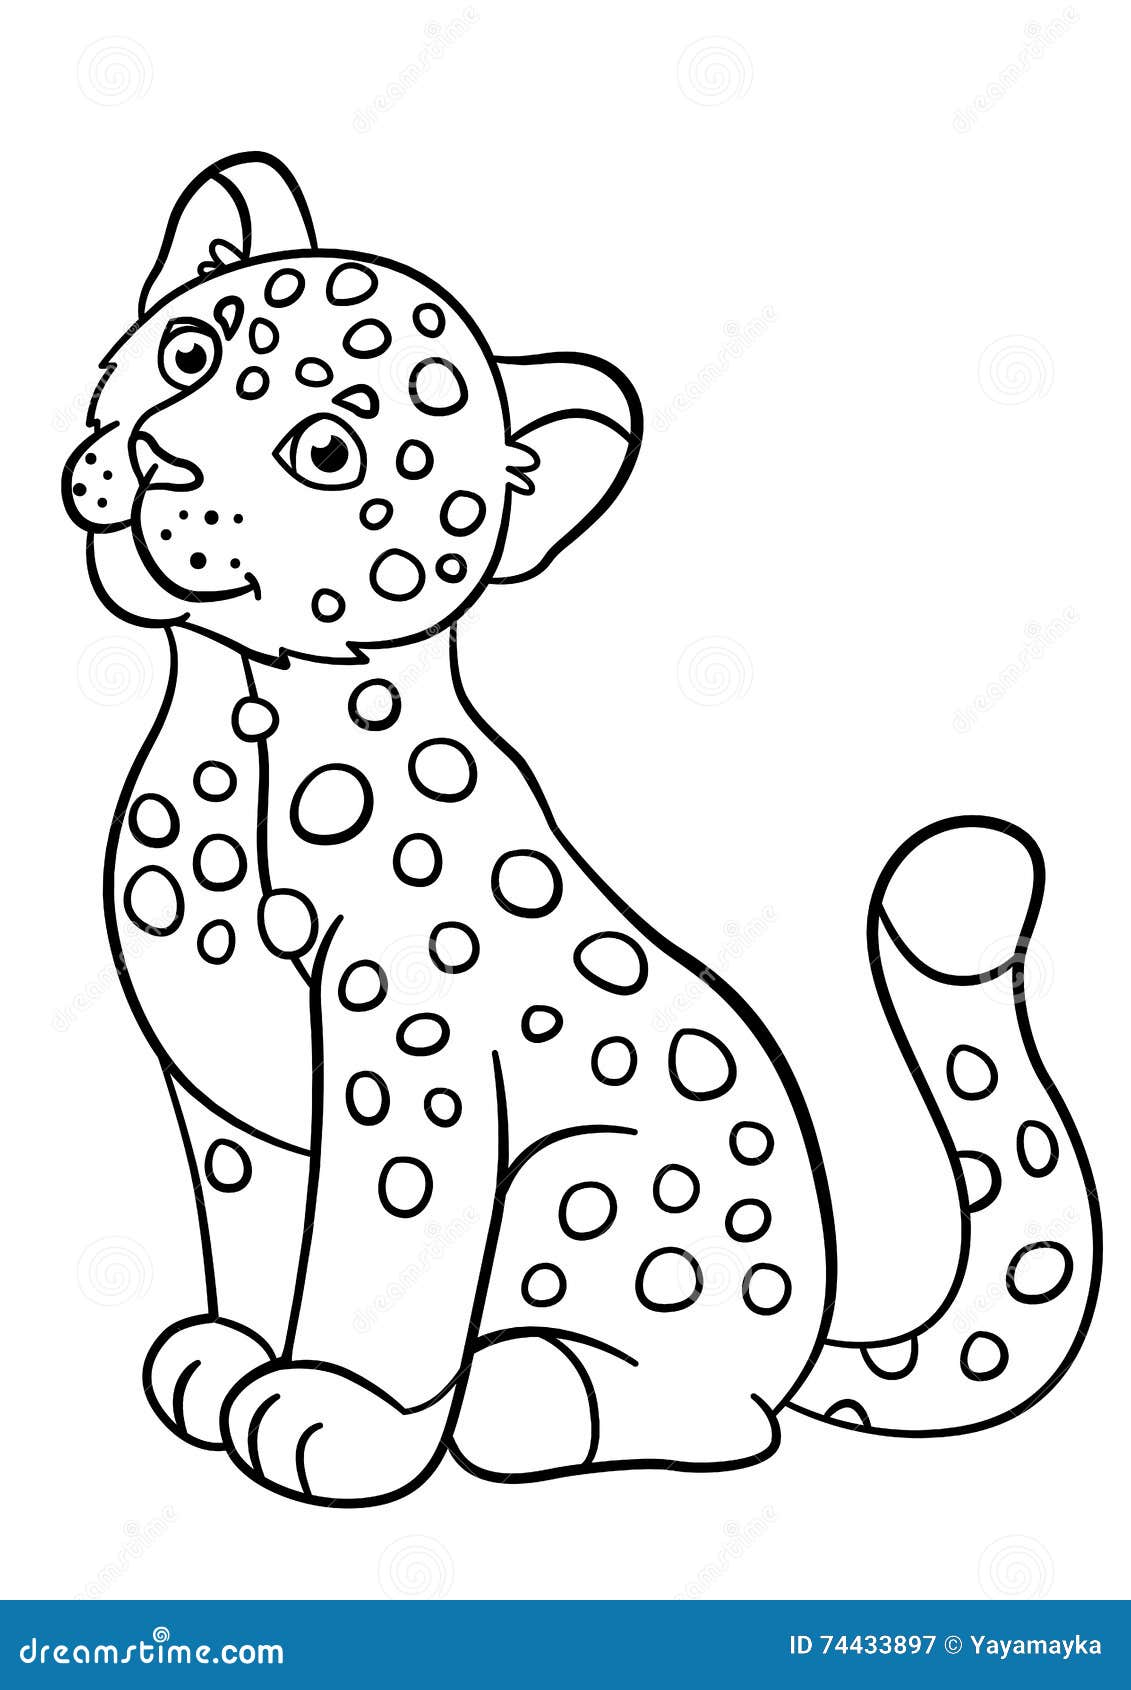 Coloring Pages Little Cute Baby Jaguar Smiles Stock Vector Illustration Of Cartoon Black 74433897